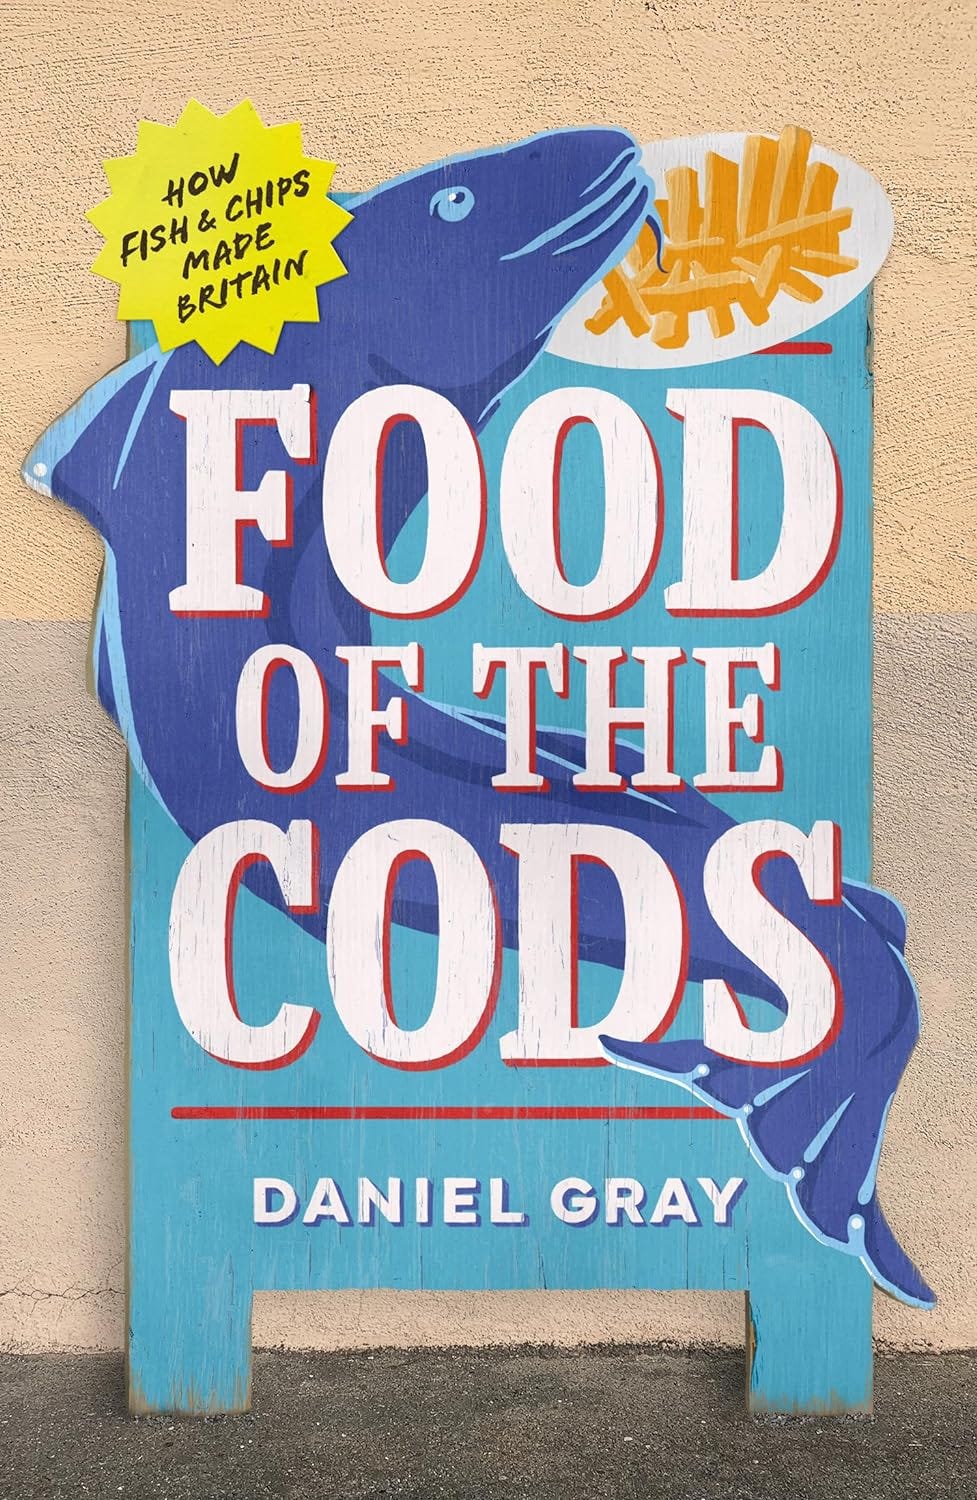 Food of the Cods by Daniel Gray 